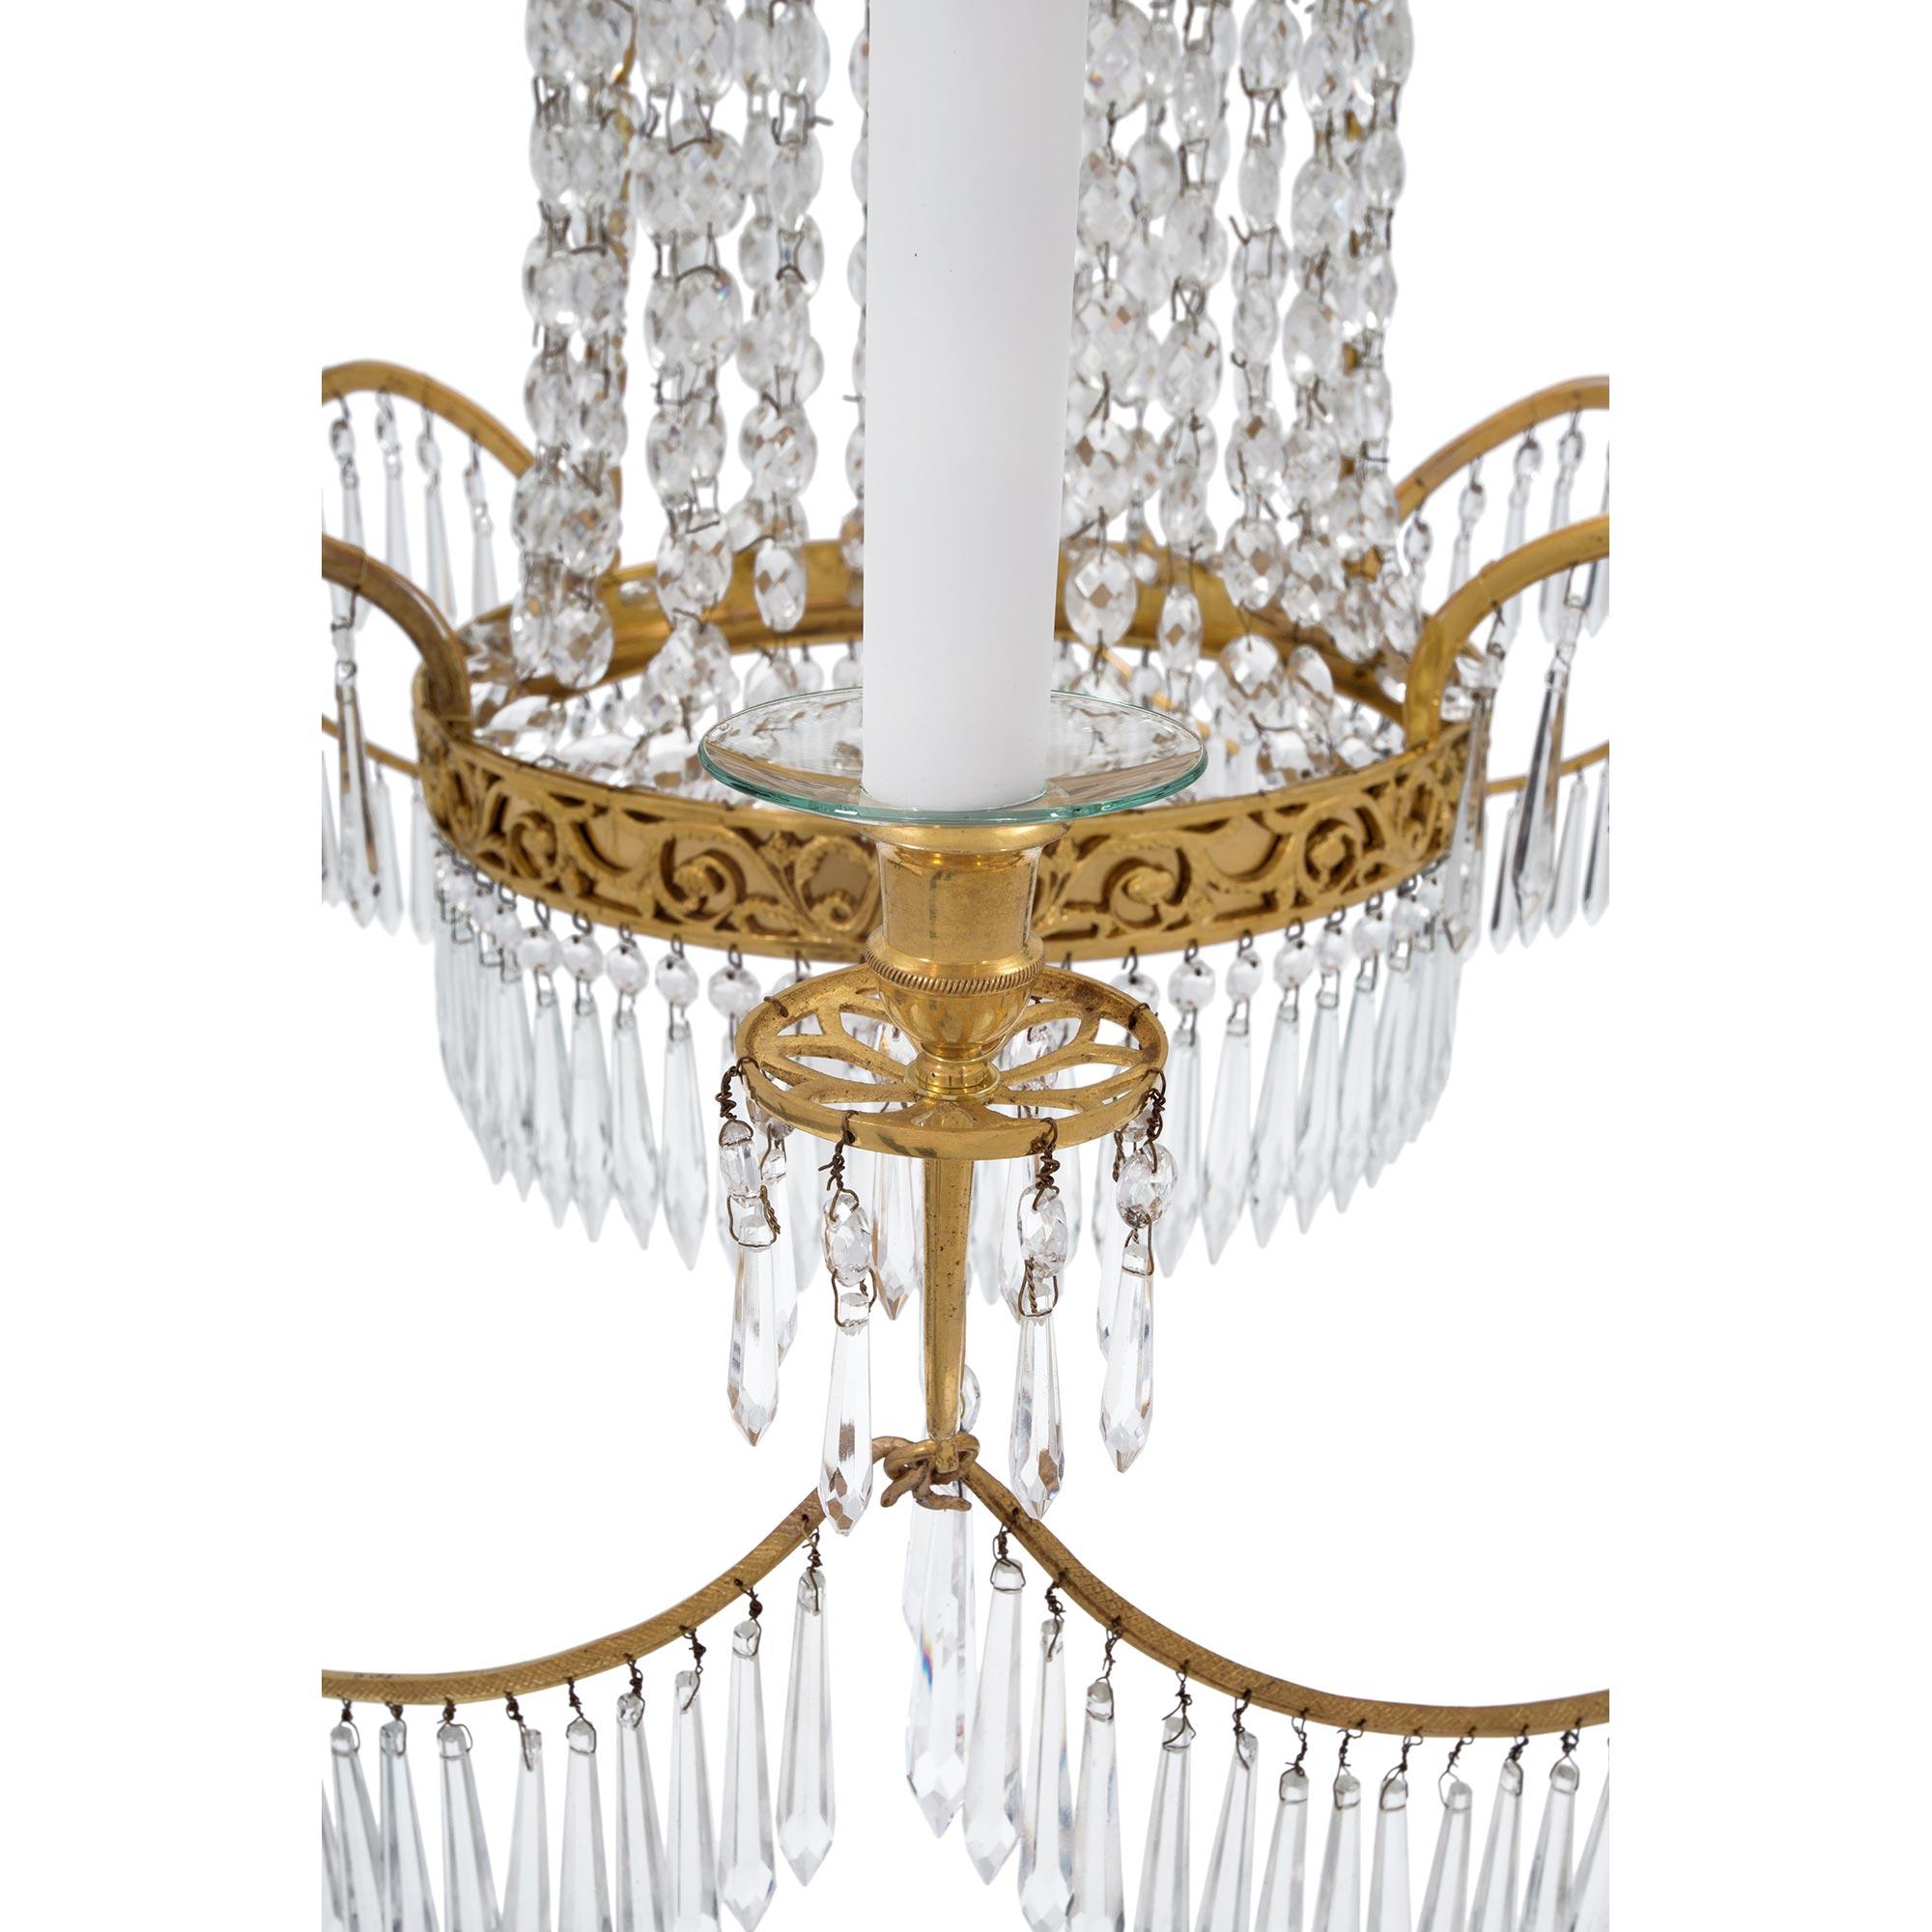 Russian 19th Century Neoclassical Ormolu and Crystal Six-Light Chandelier For Sale 4